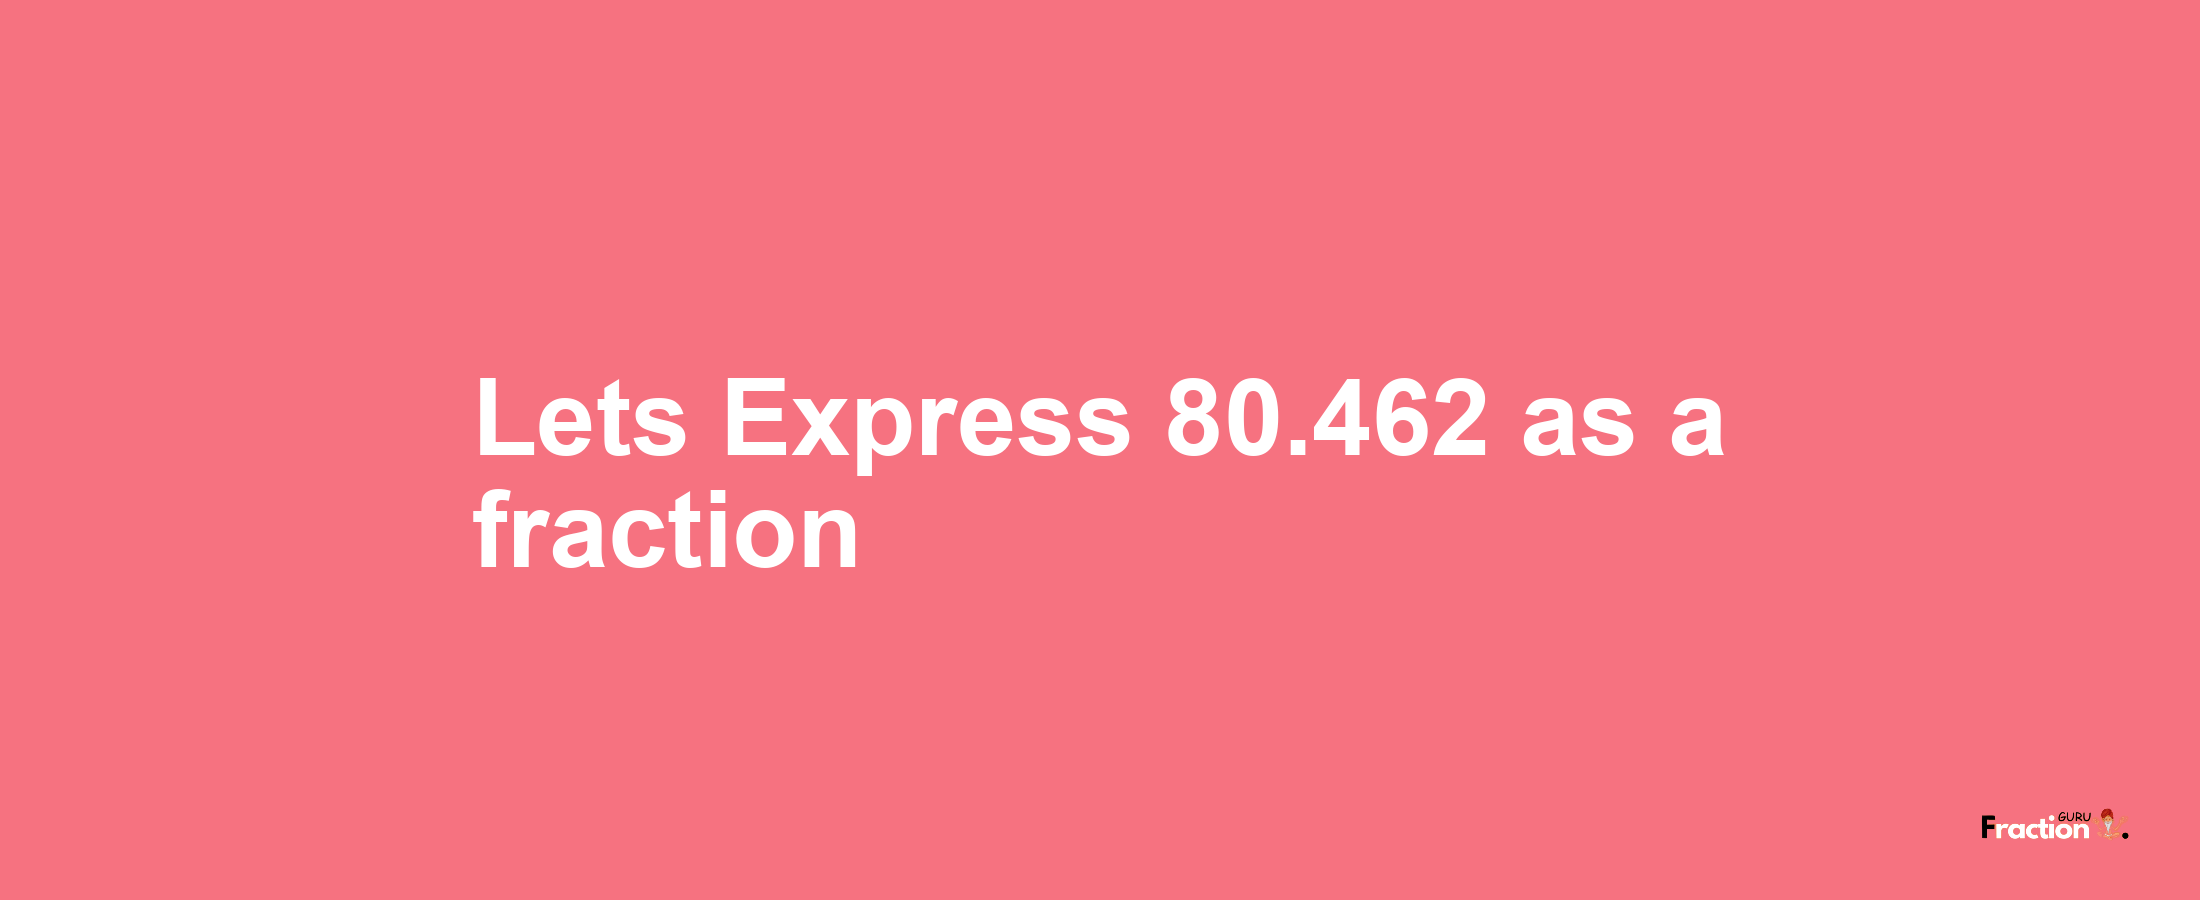 Lets Express 80.462 as afraction